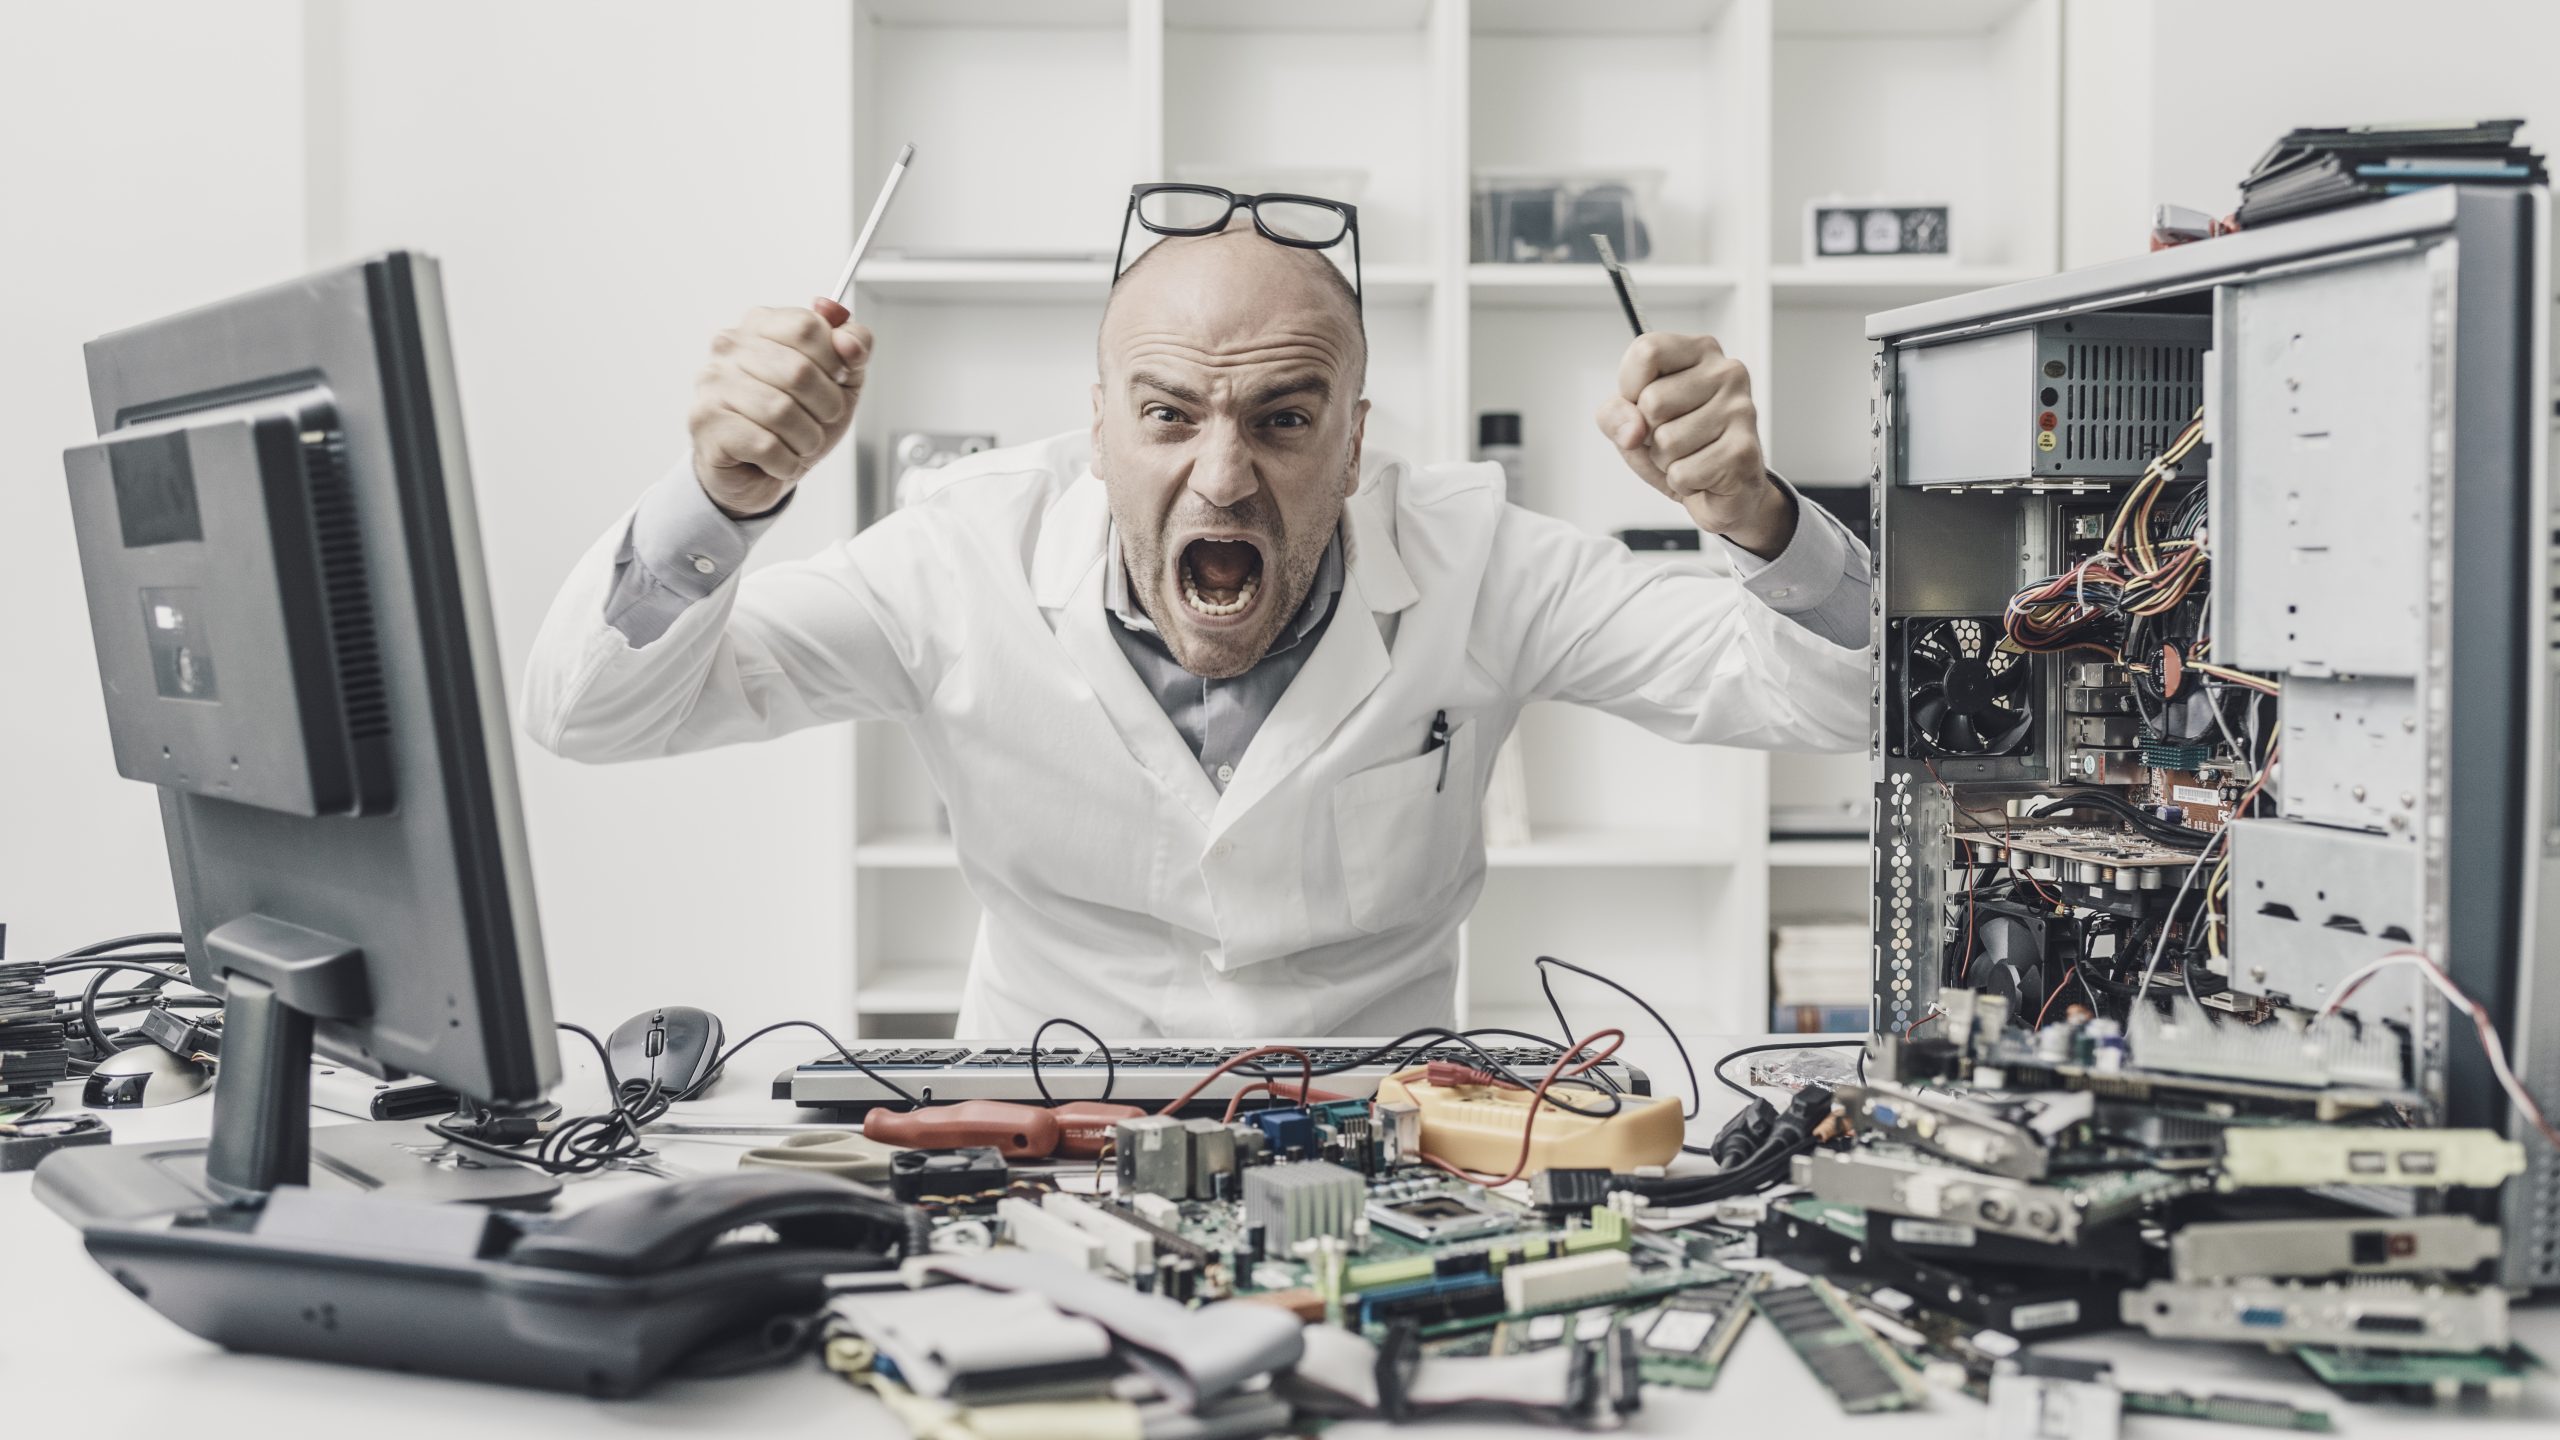 Frustrated angry technician trying to repair a computer, his desk is full of computer parts